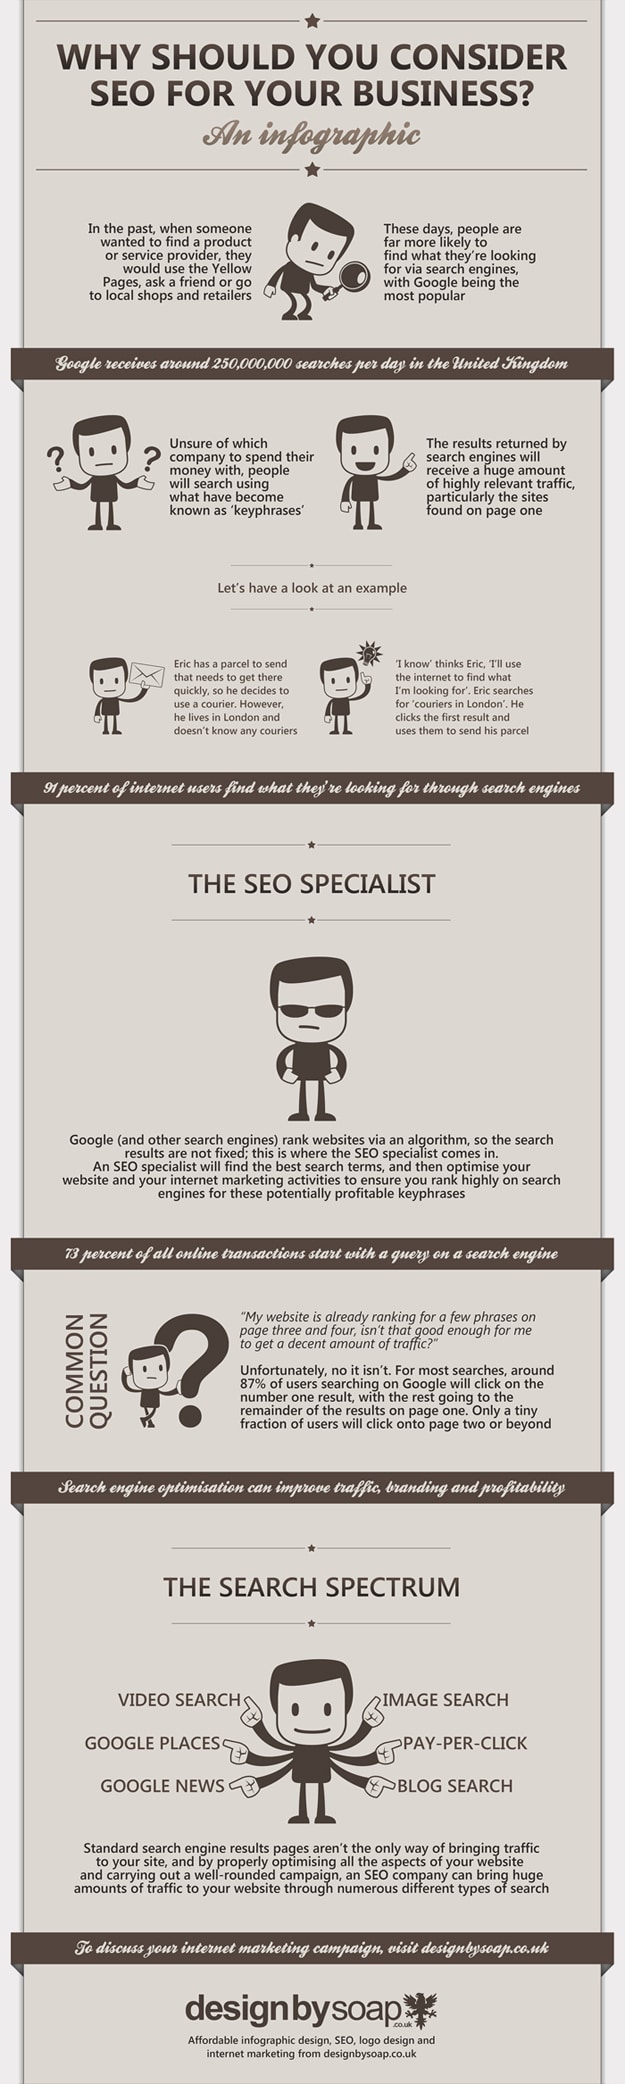 Why You Should Consider SEO For Your Business